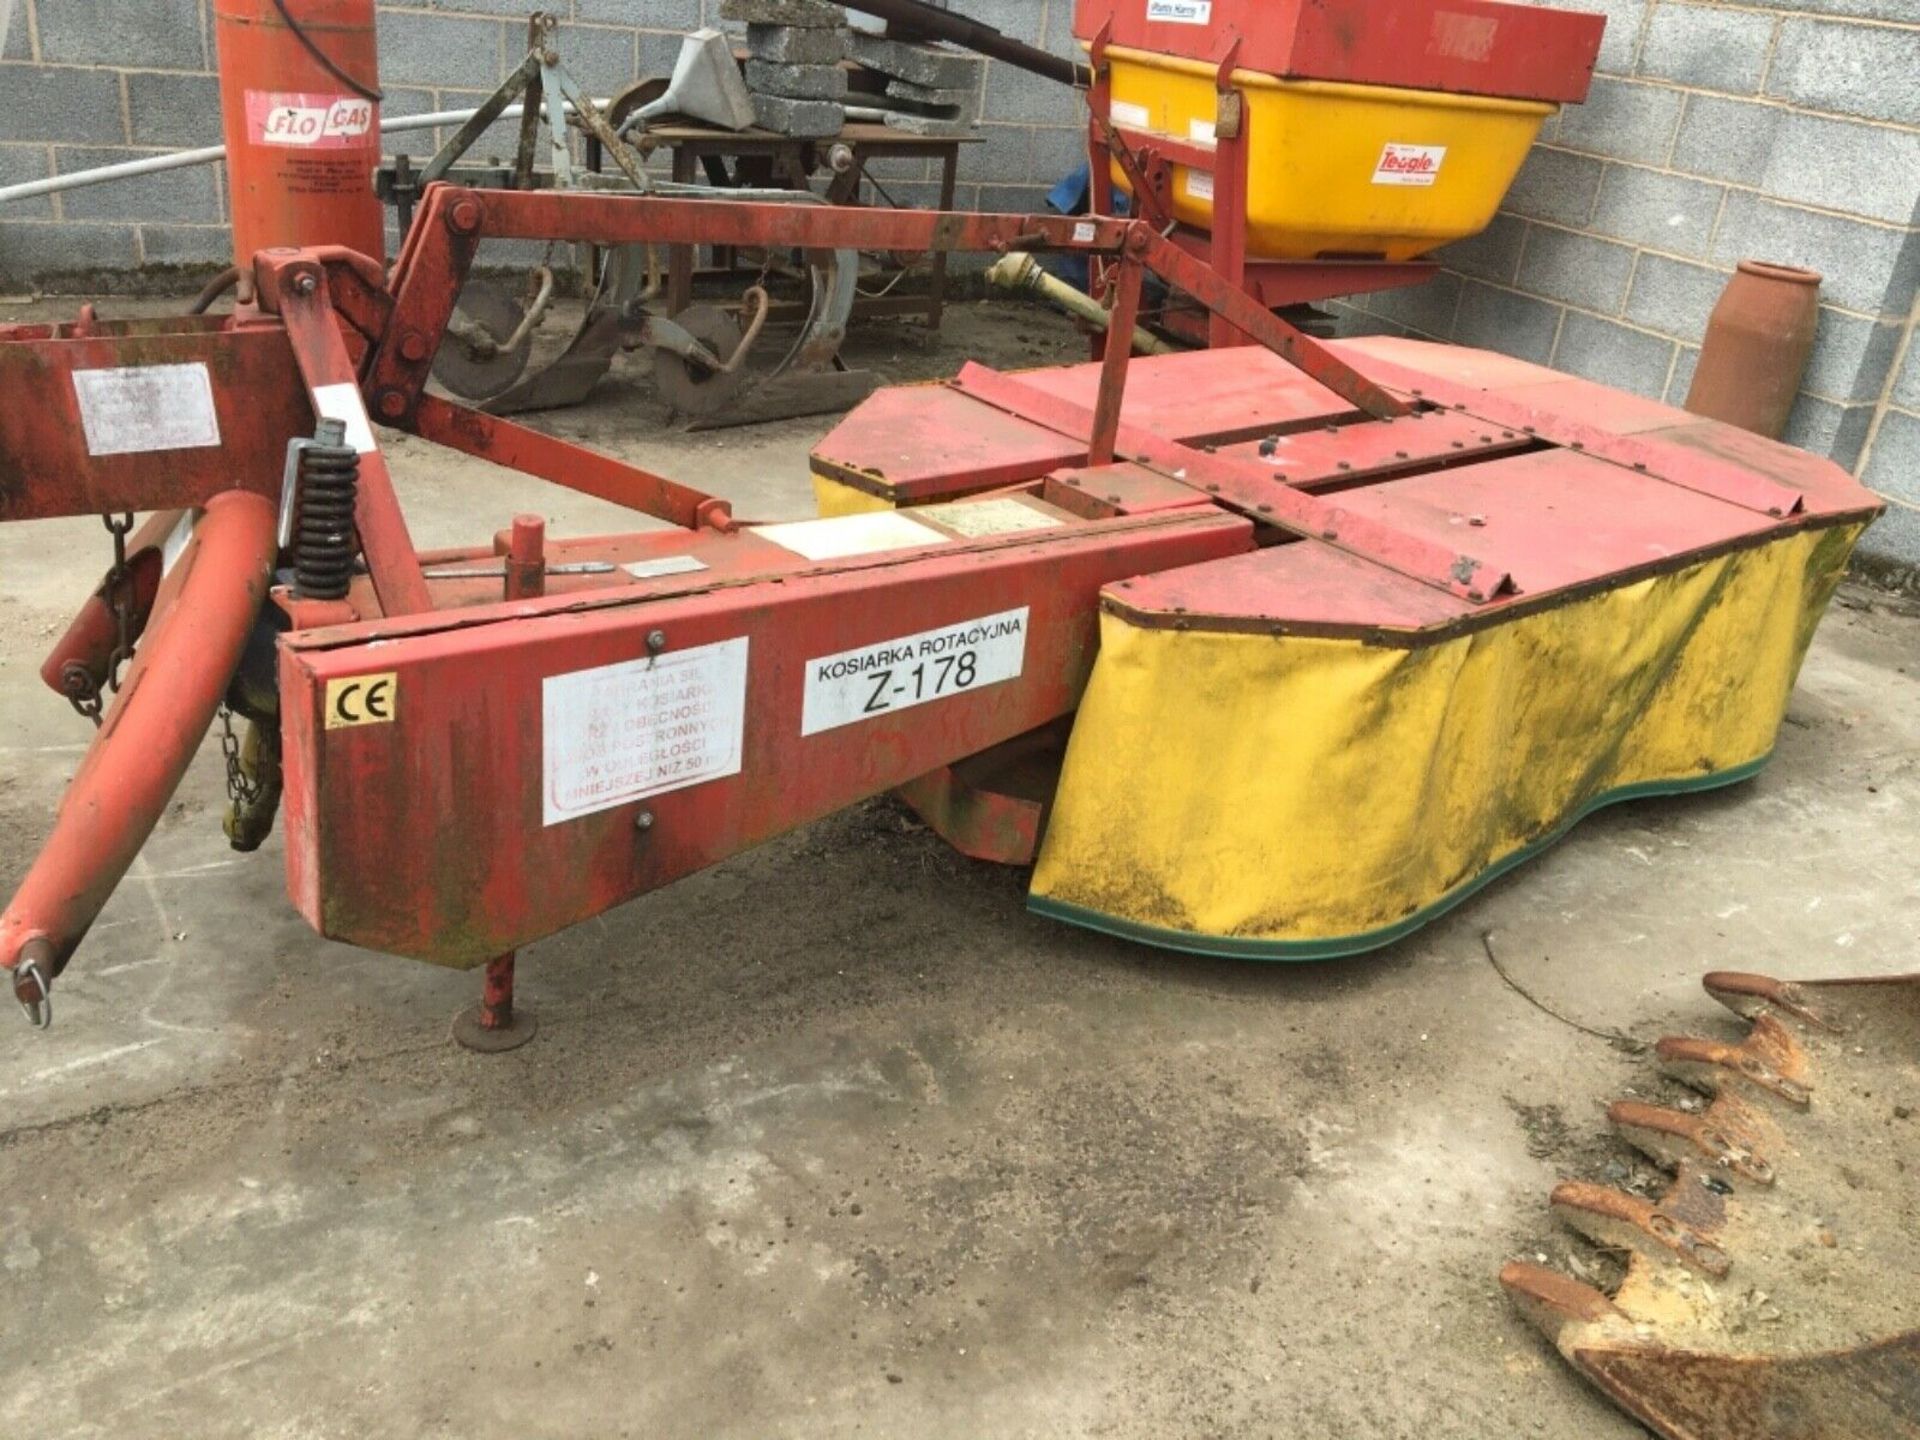 Z-178 DRUM MOWER IN EXCELLENT WORKING CONDITION, 1 OWNER FROM NEW, ONLY USED TWICE A YEAR *NO VAT*